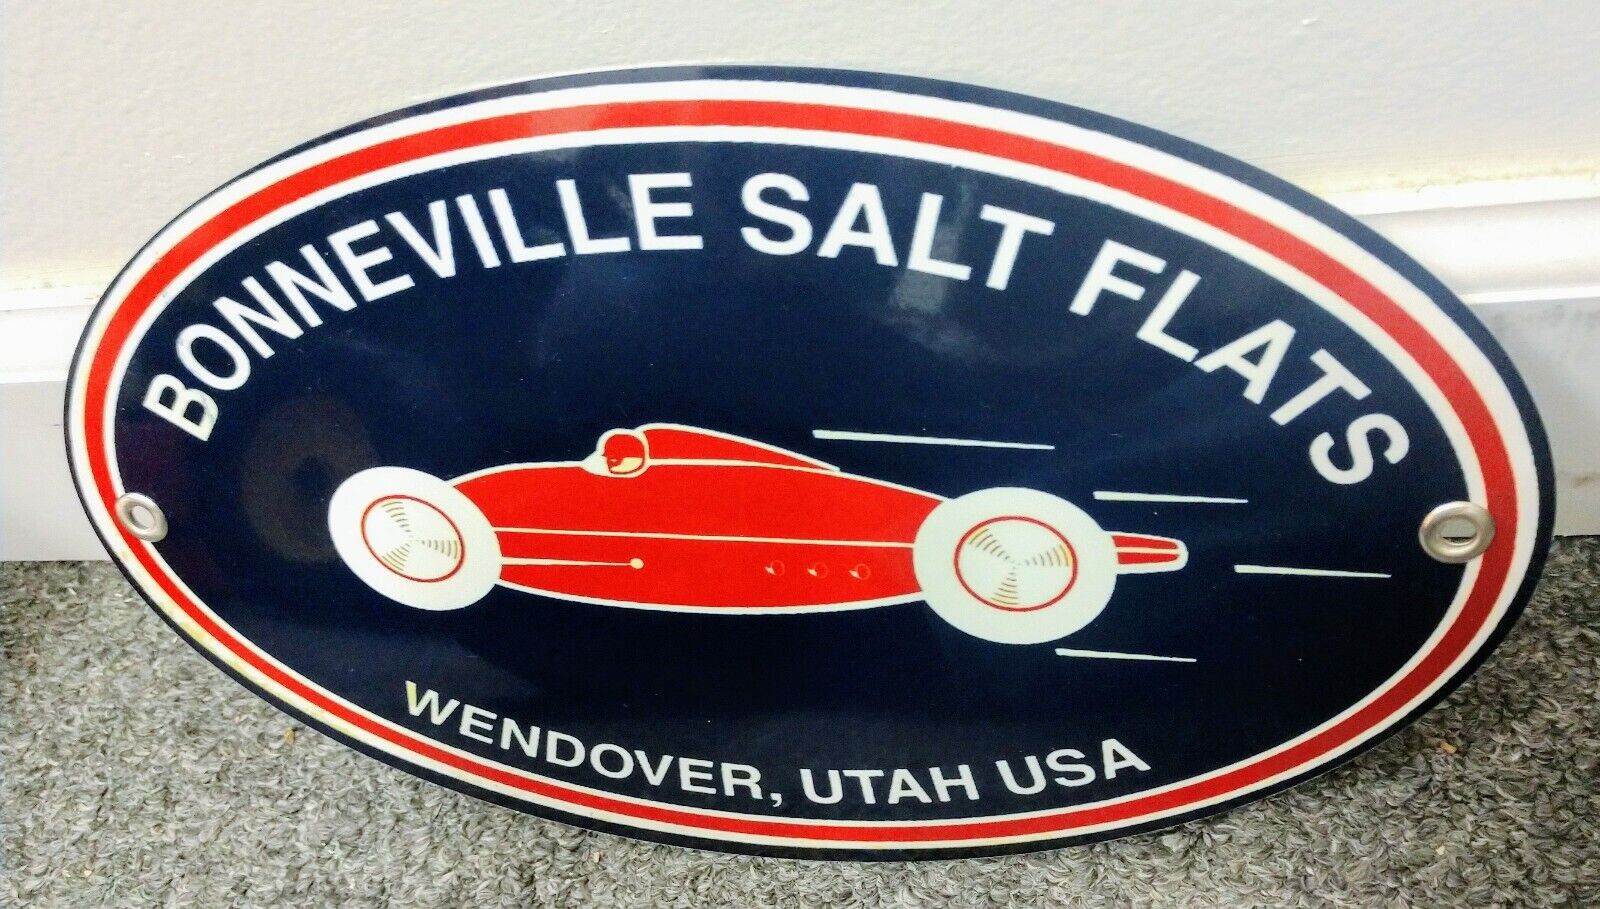 Bonneville Salt Flats Speed Trials sign ..  on any 8 or more signs.